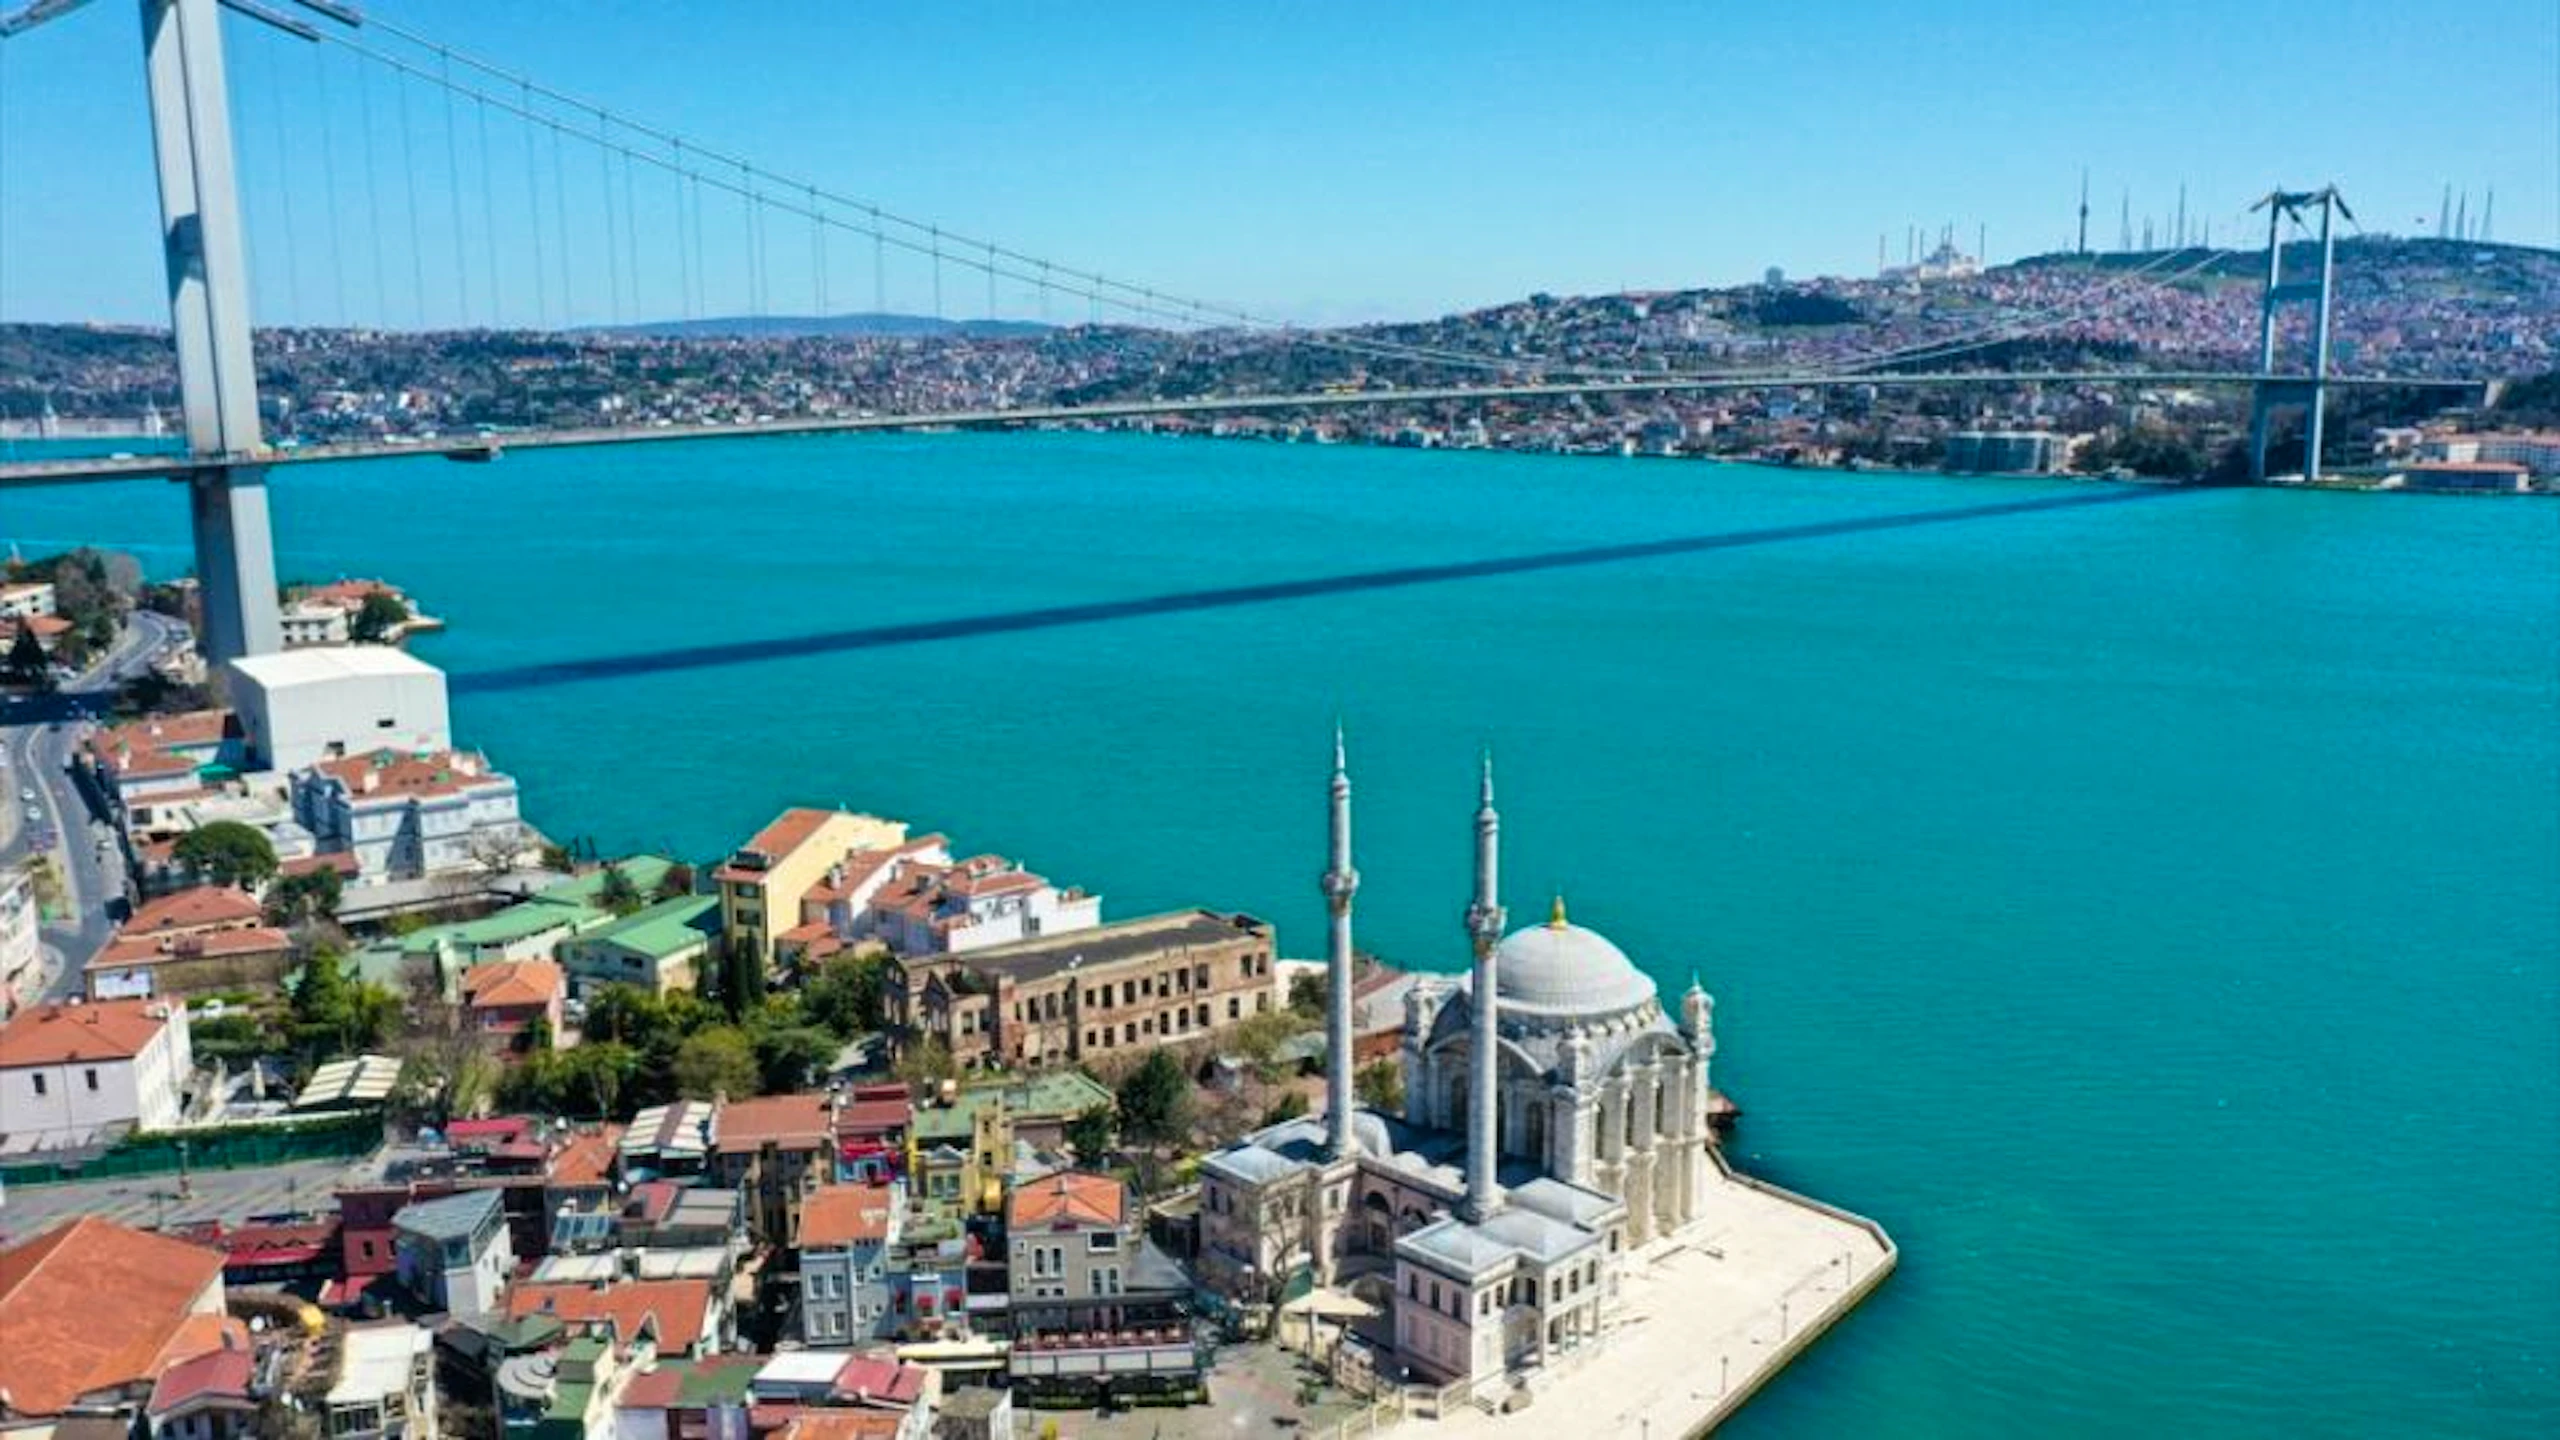 Istanbul Bosphorus Cruise Tour, Bus and Cable Car Ride Discount